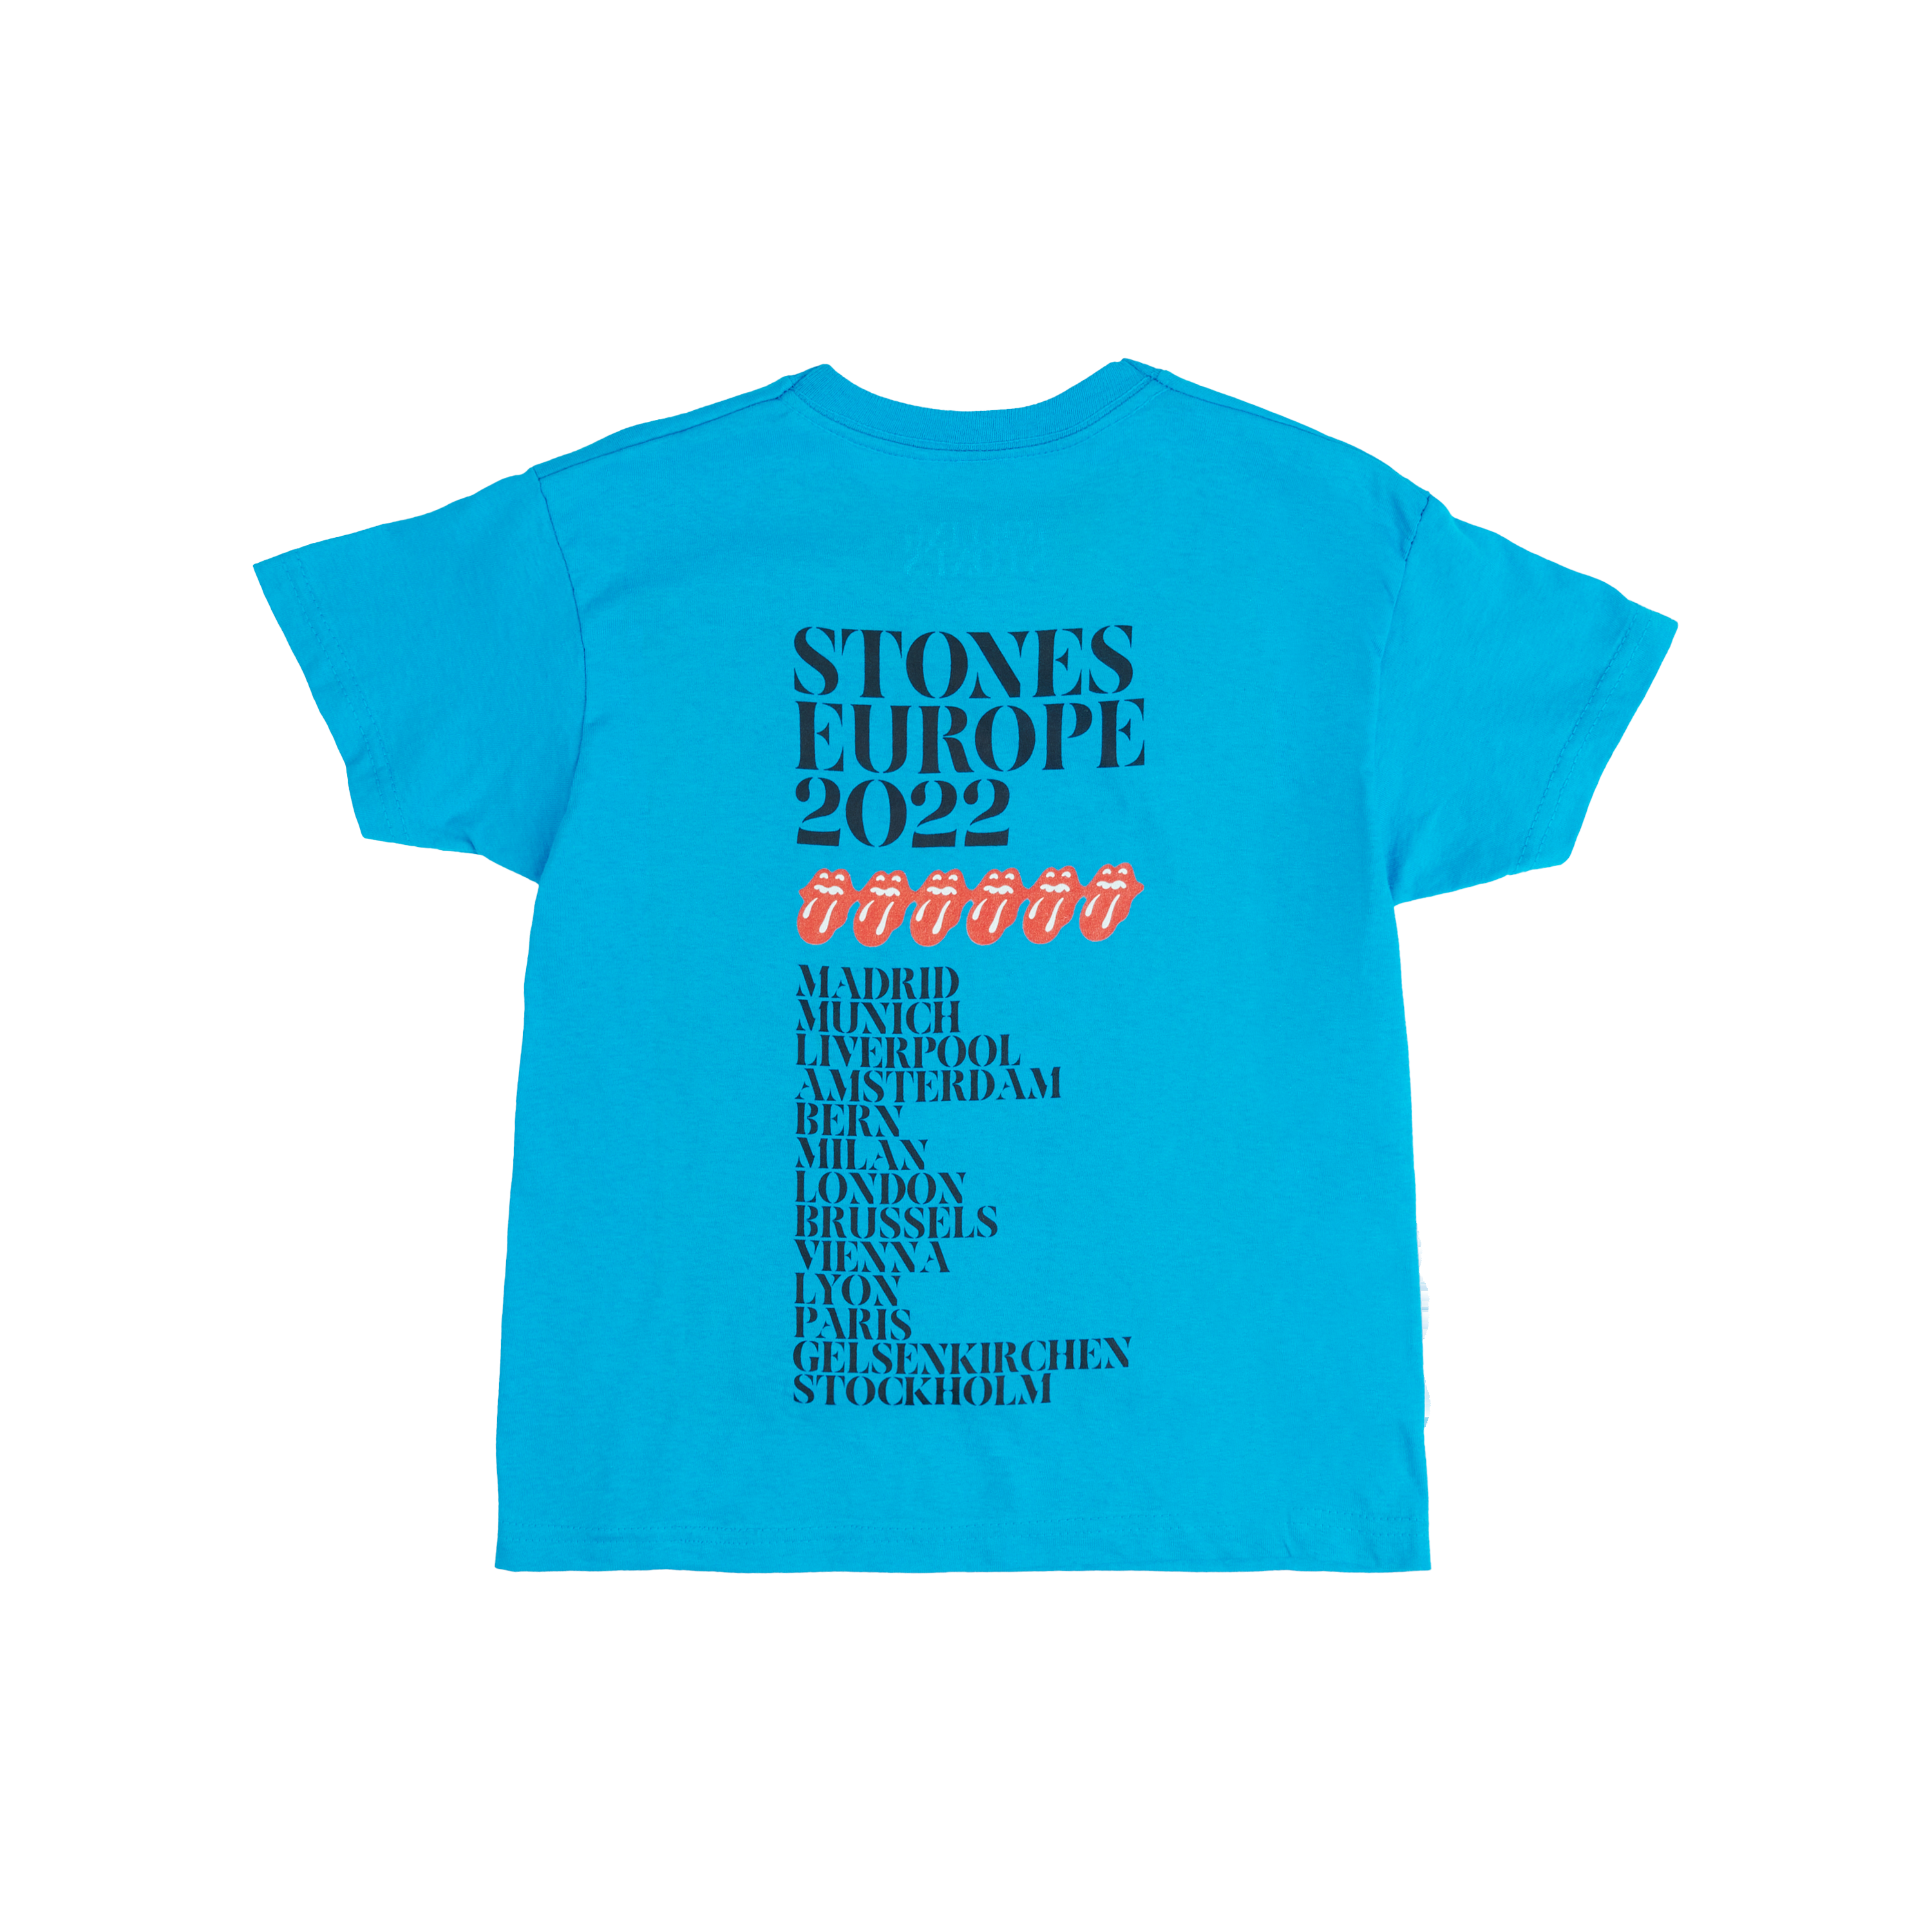 The Rolling Stones - Sixty Cyberdelic Kids Blue Tour T-Shirt